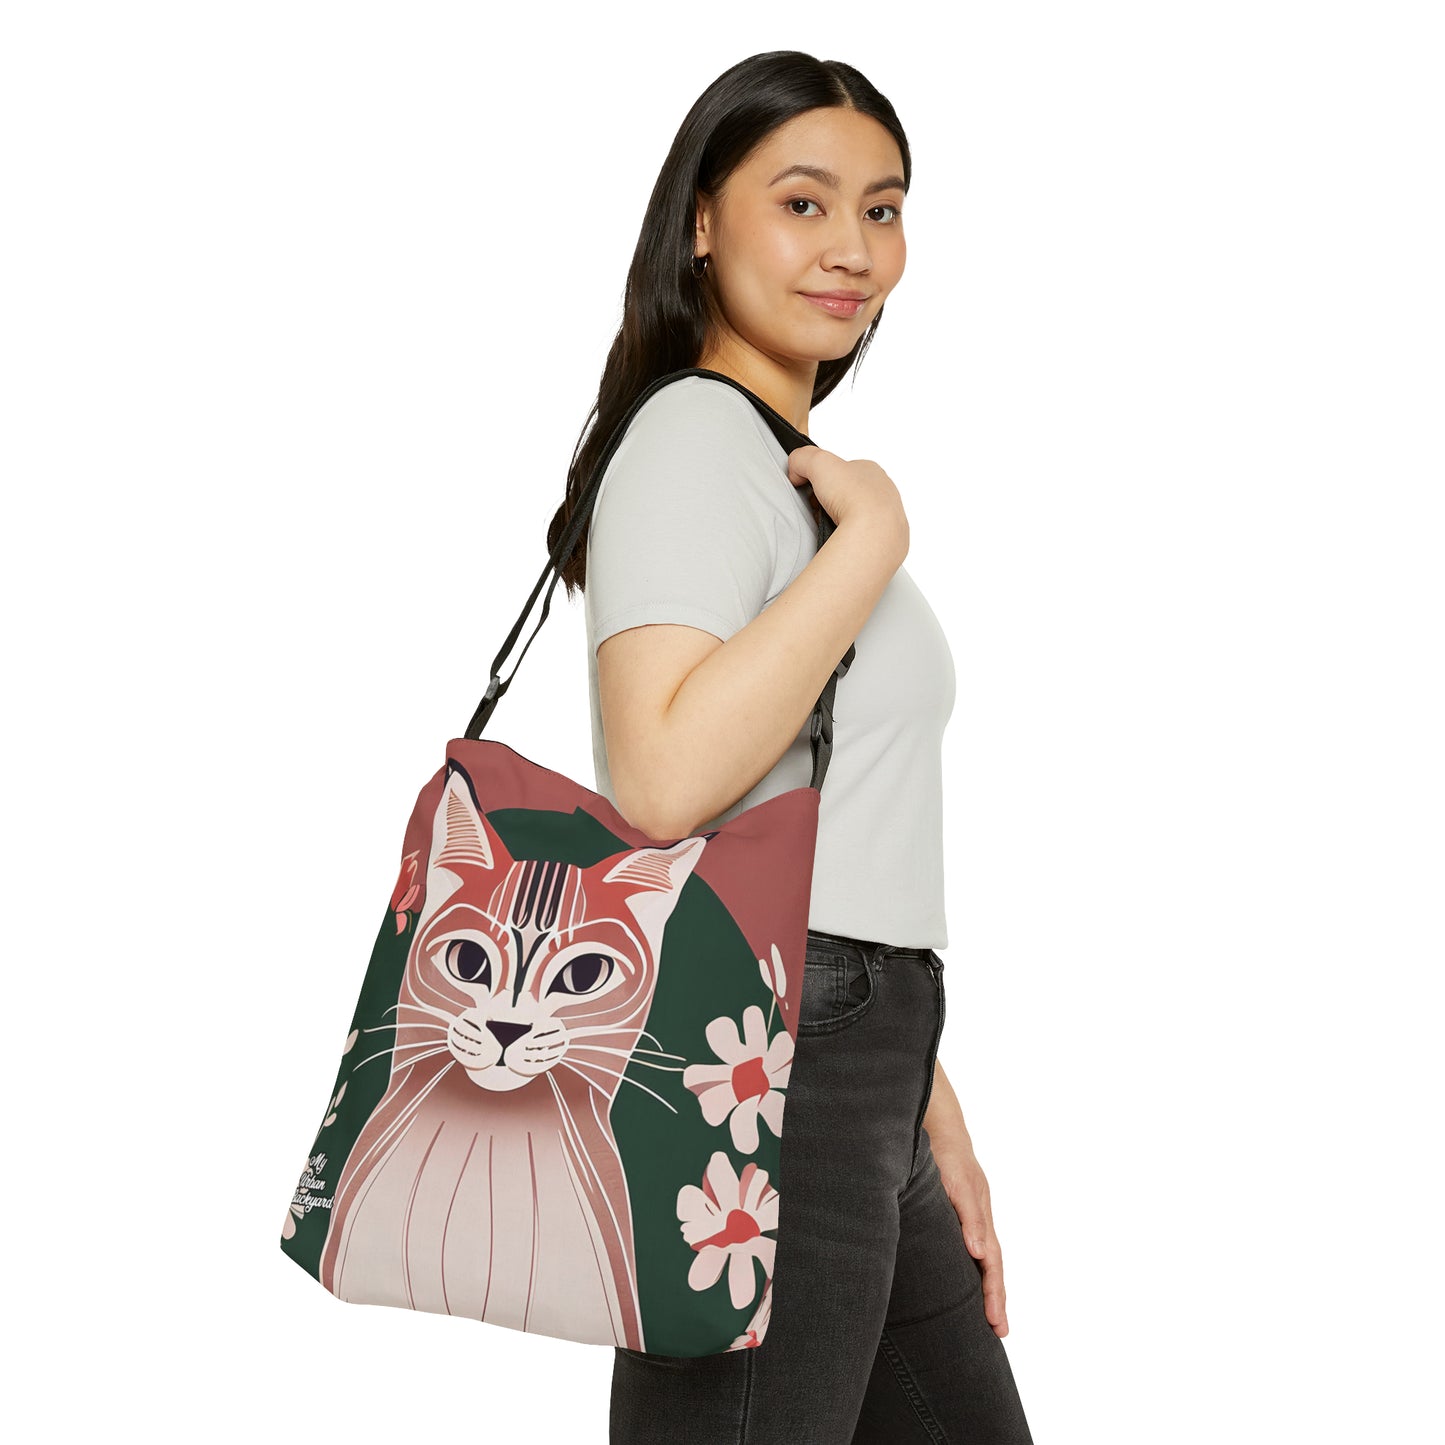 Art Deco Tabby, Tote Bag with Adjustable Strap - Trendy and Versatile